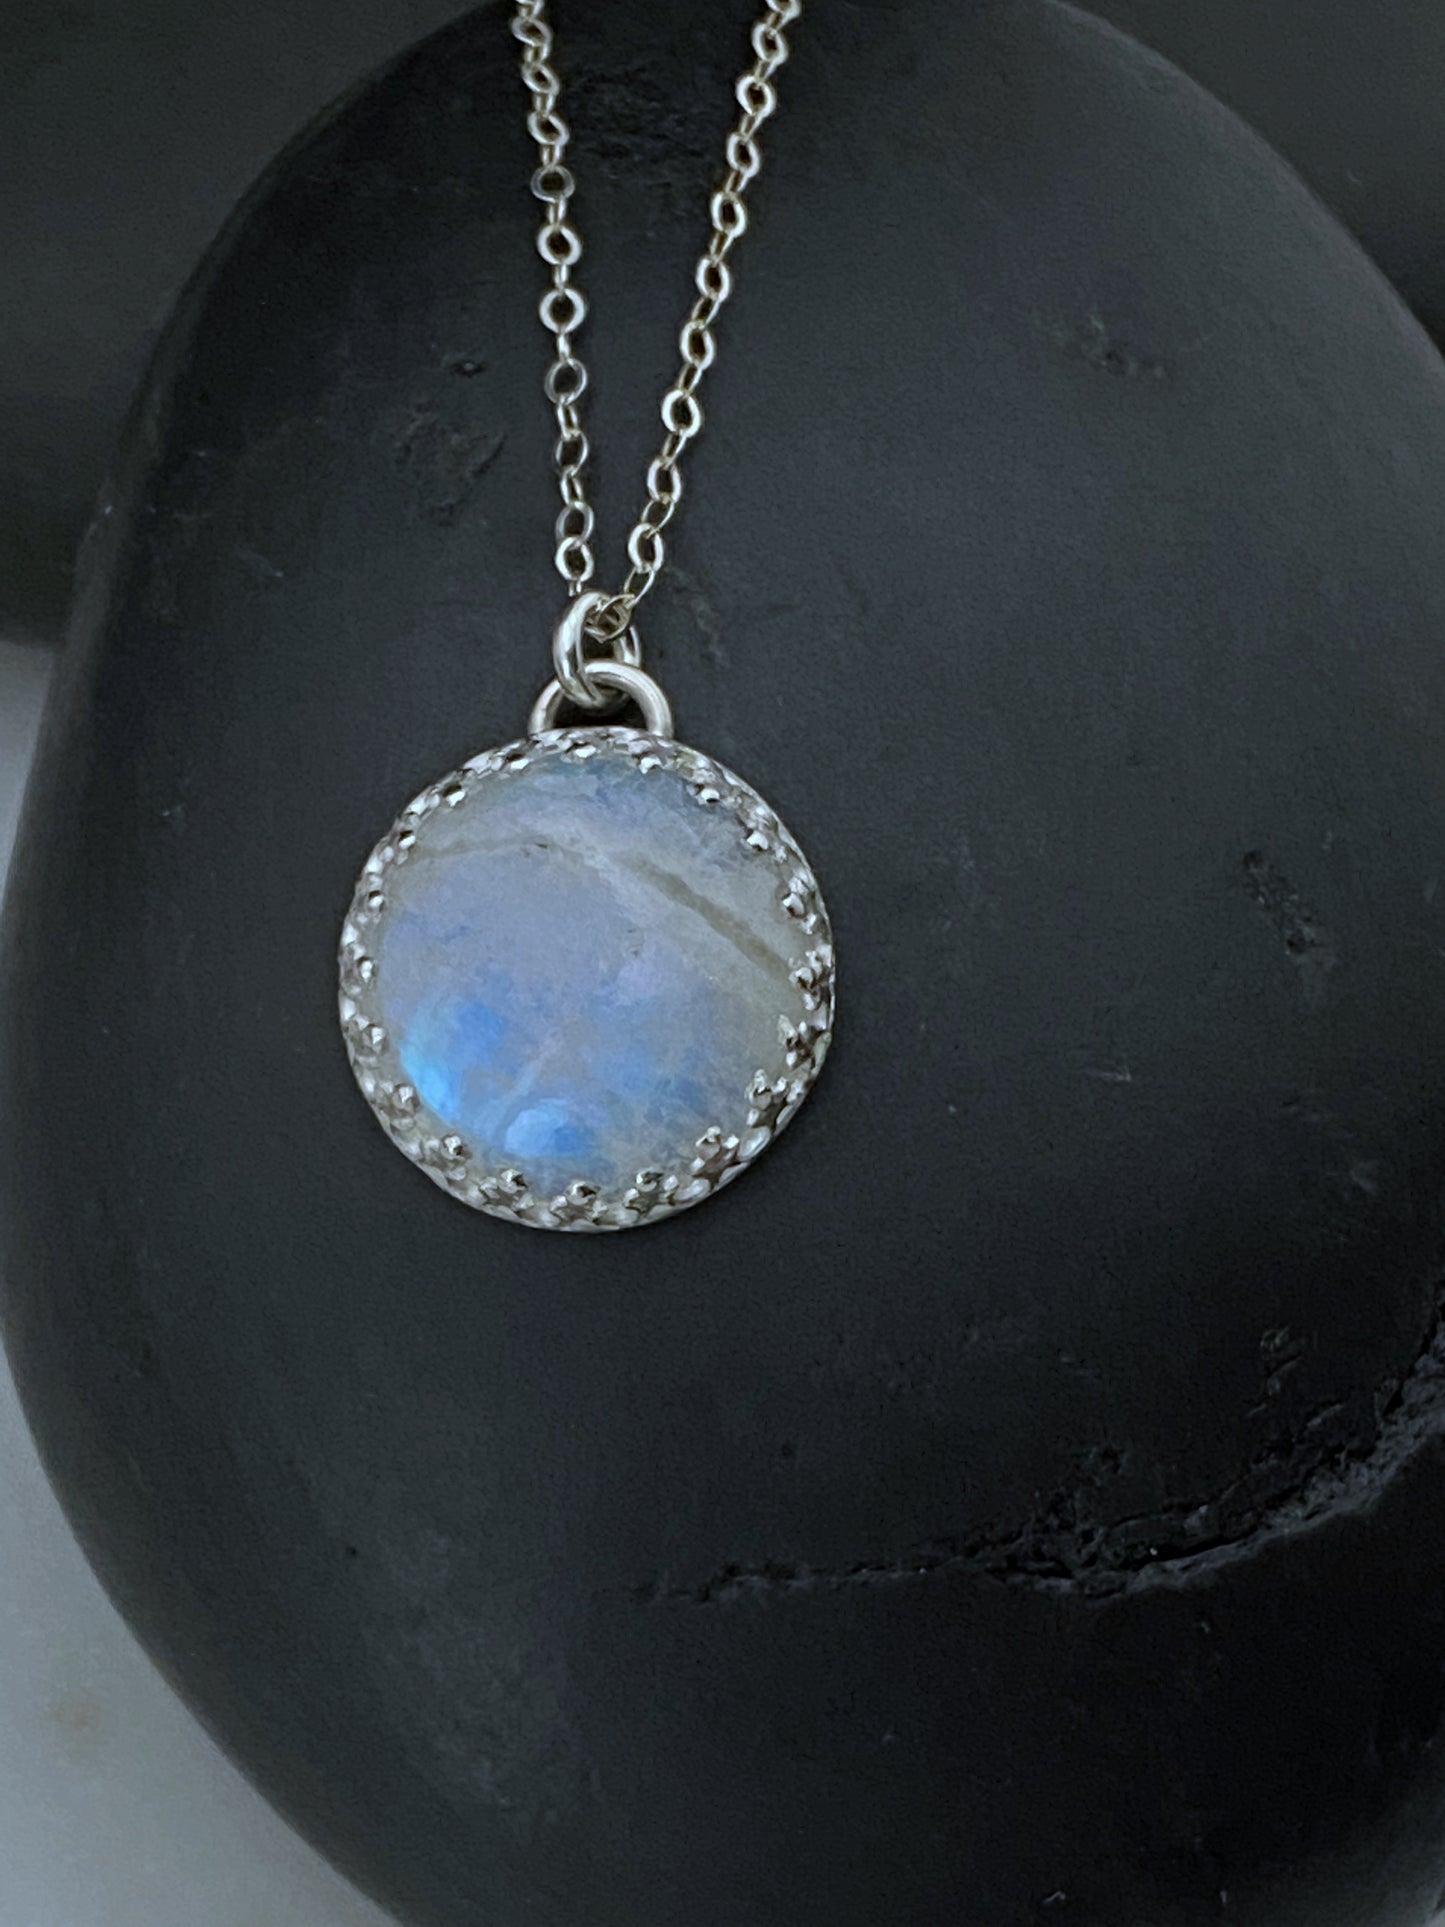 Moonstone and sterling silver necklace